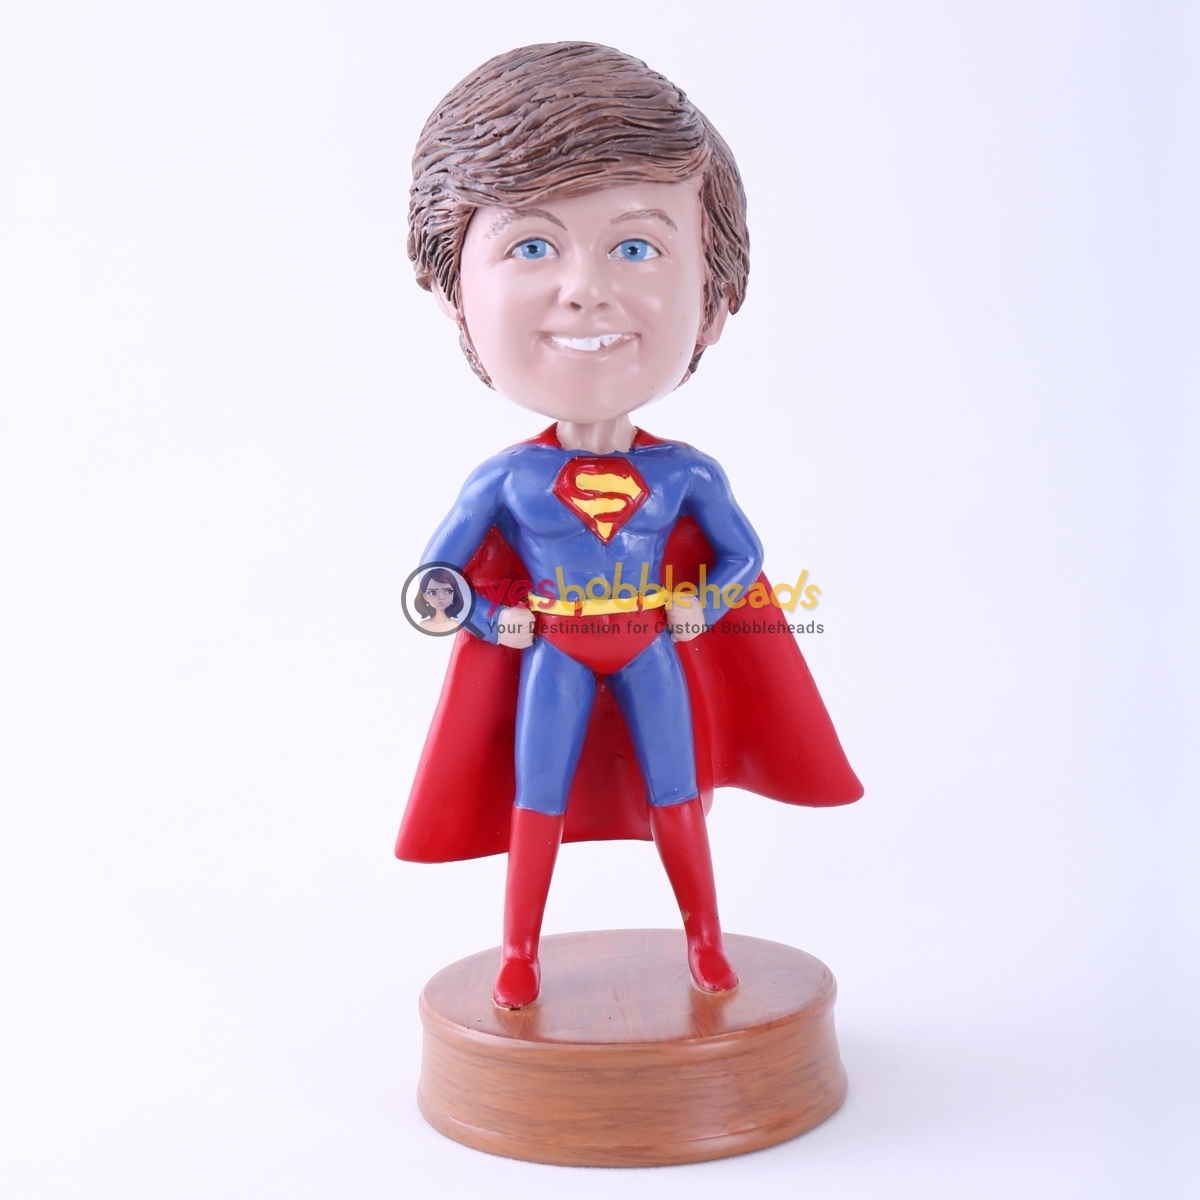 Picture of Custom Bobblehead Doll: Little Boy in Red Cape